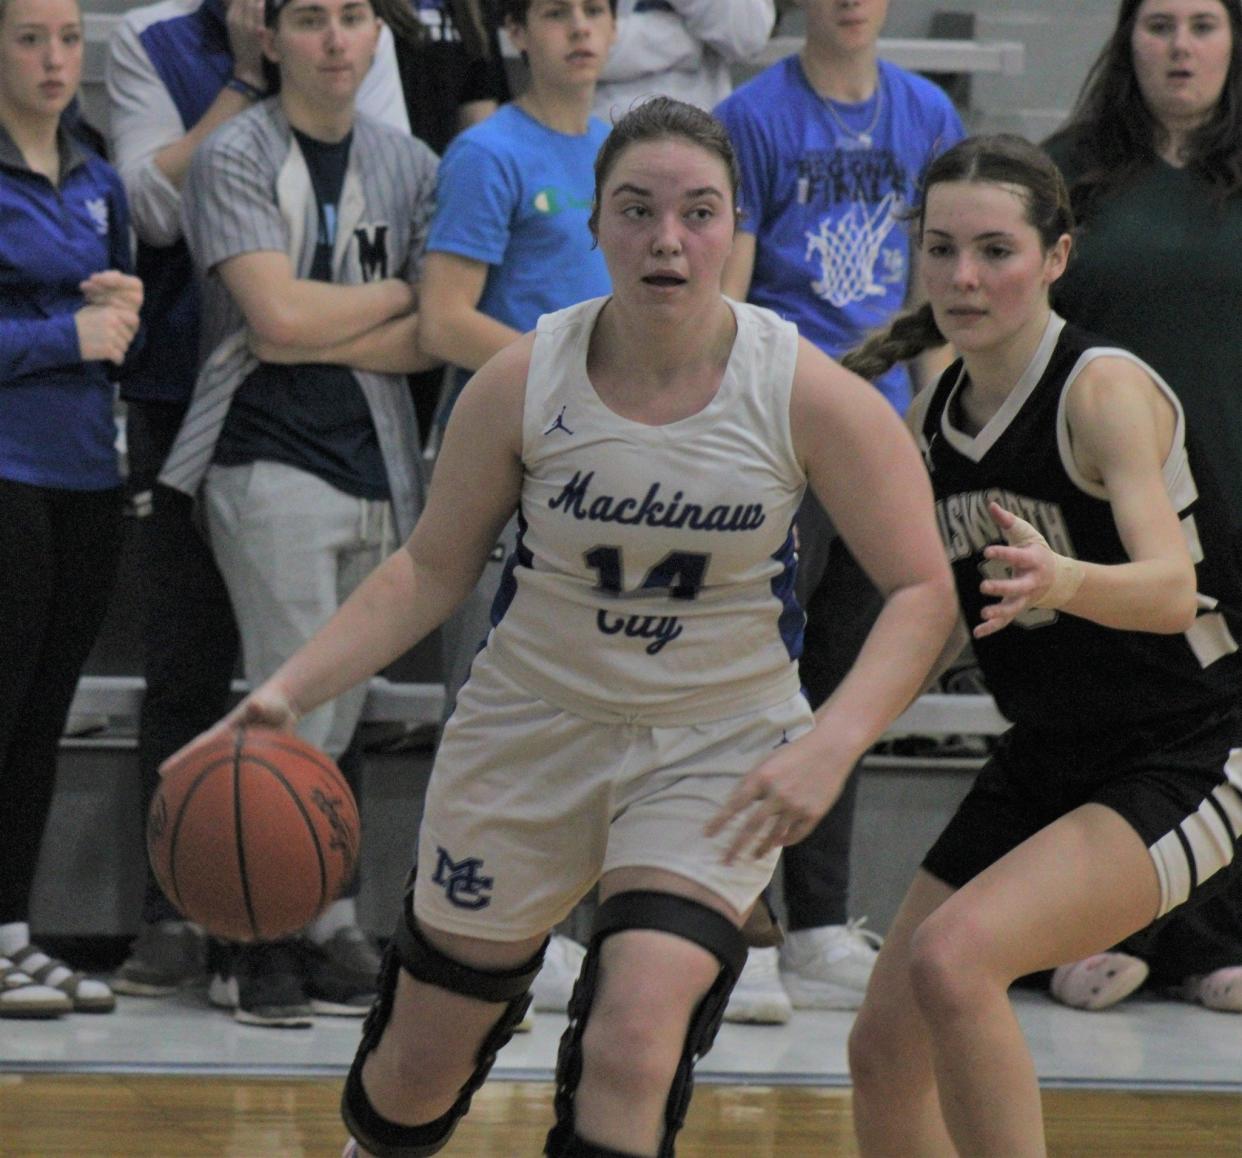 Jersey Beauchamp (14) and the Mackinaw City girls earned a crucial conference win over Burt Lake NMCA at home on Tuesday.